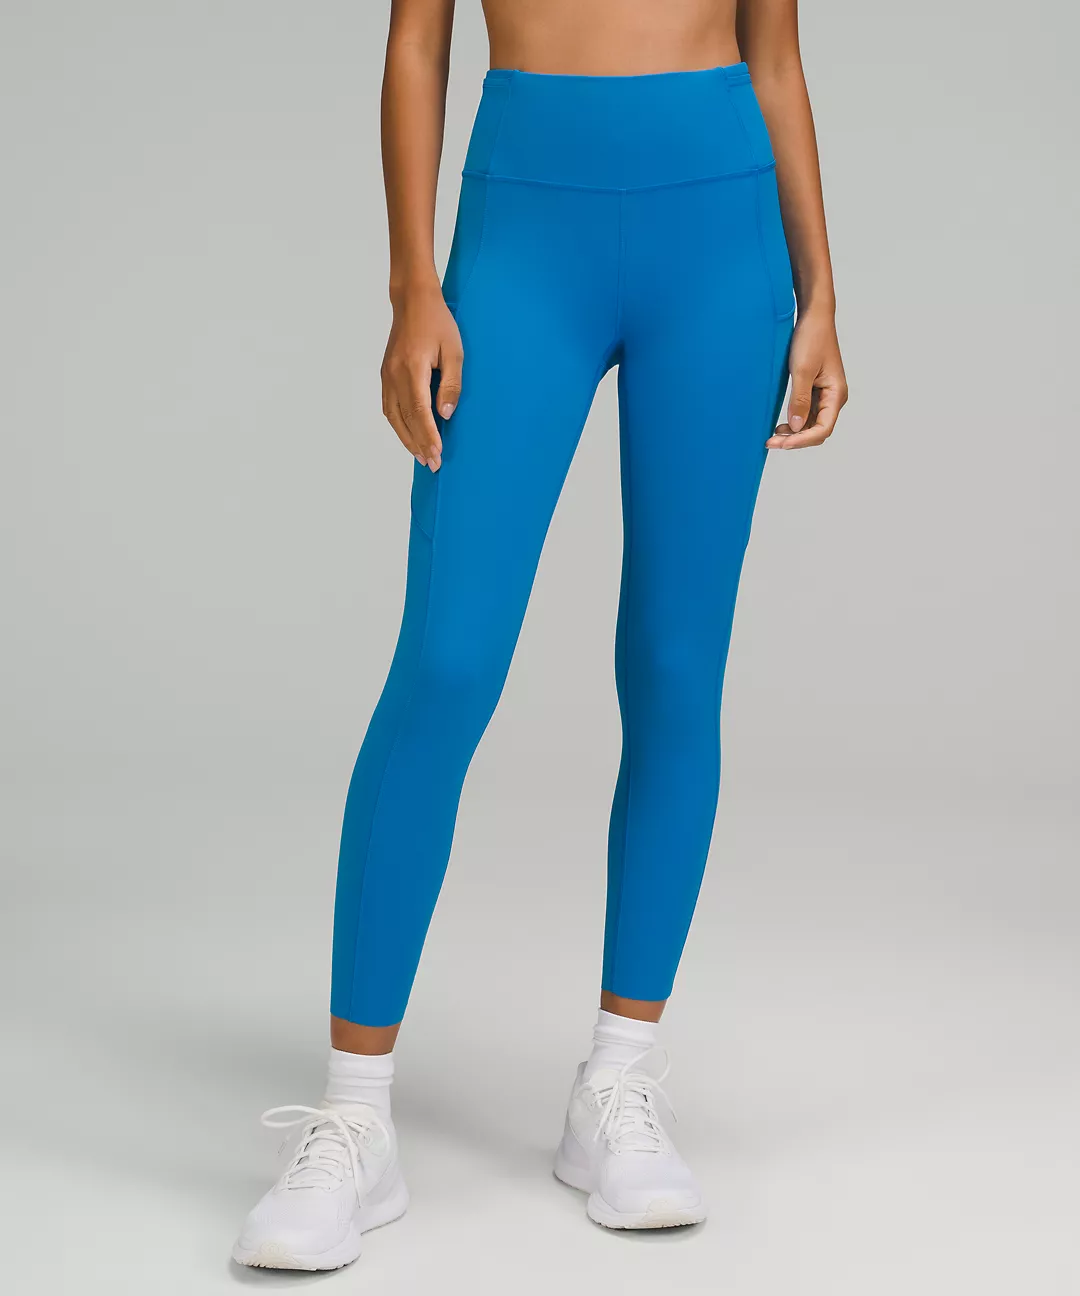 A lululemon Fast and Free High-Rise Tight 25"